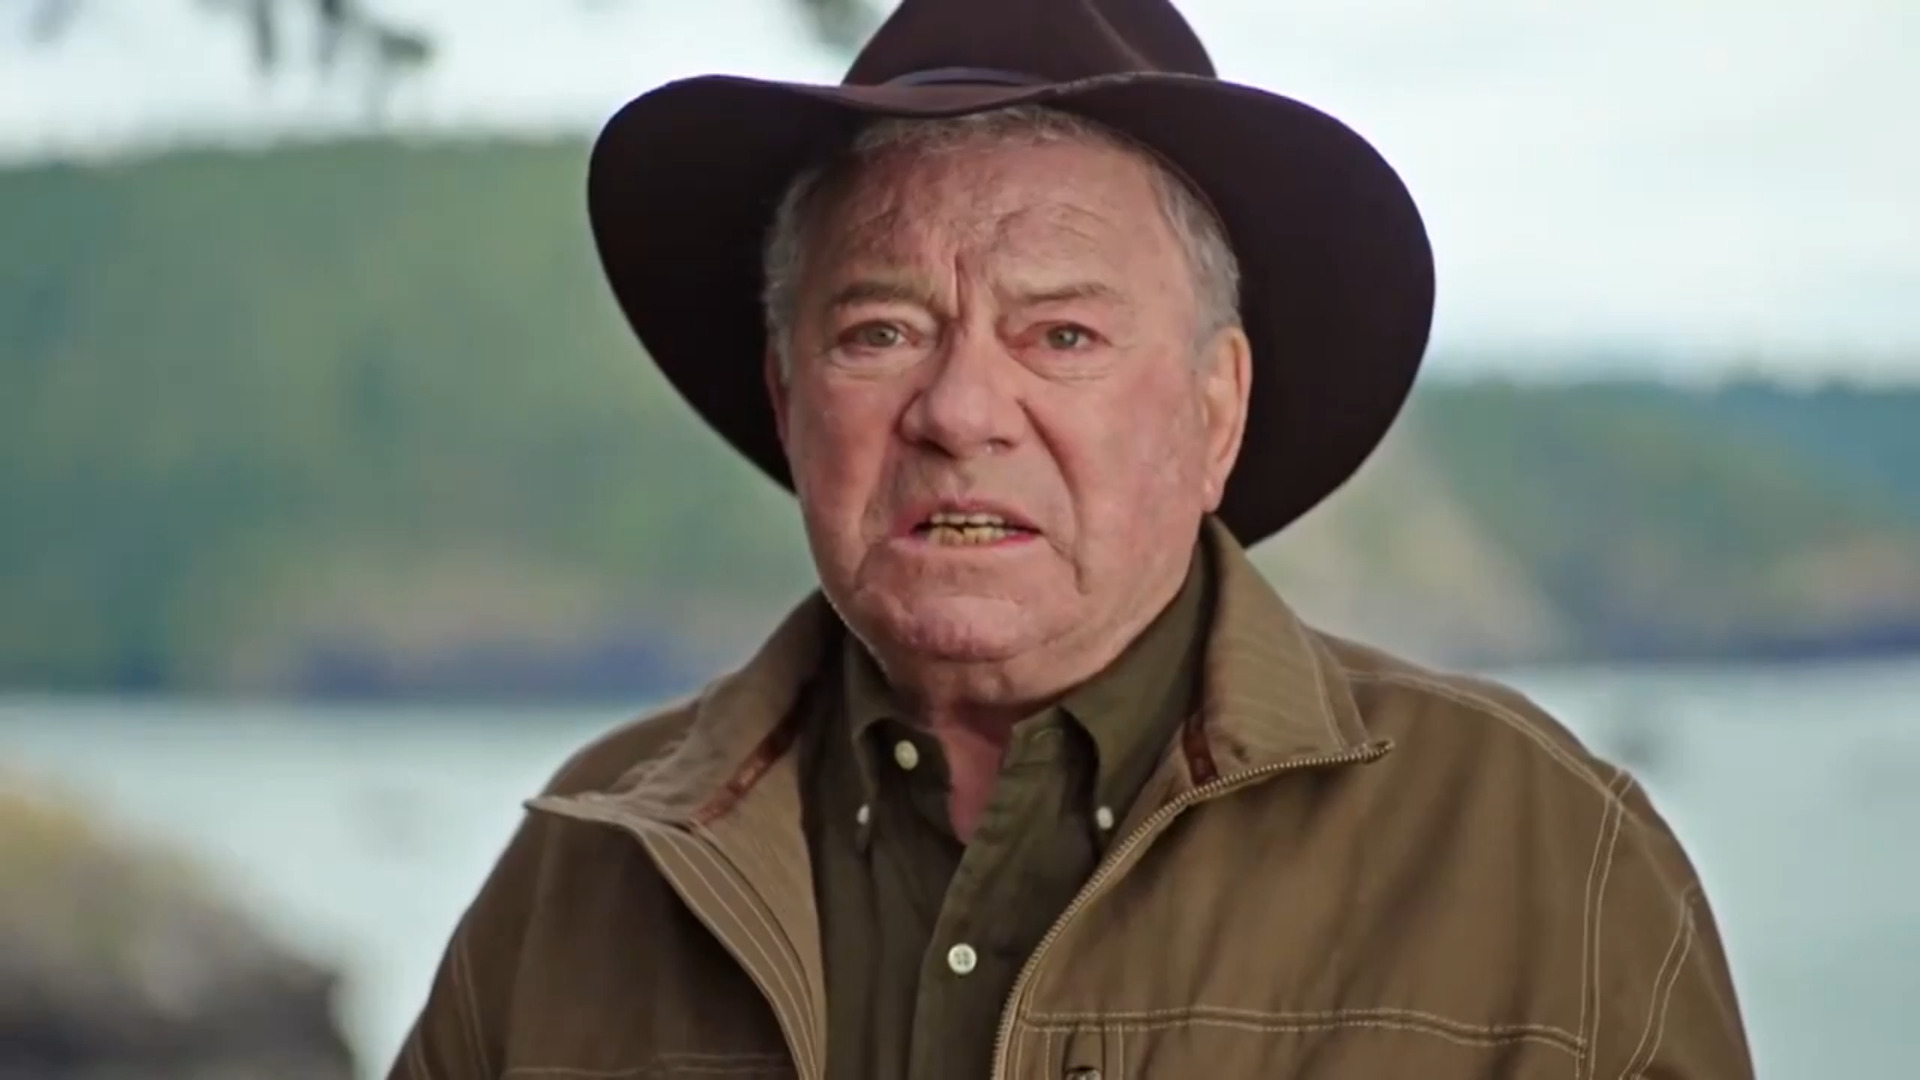 William Shatner launches foul-mouthed tirade about salmon farming